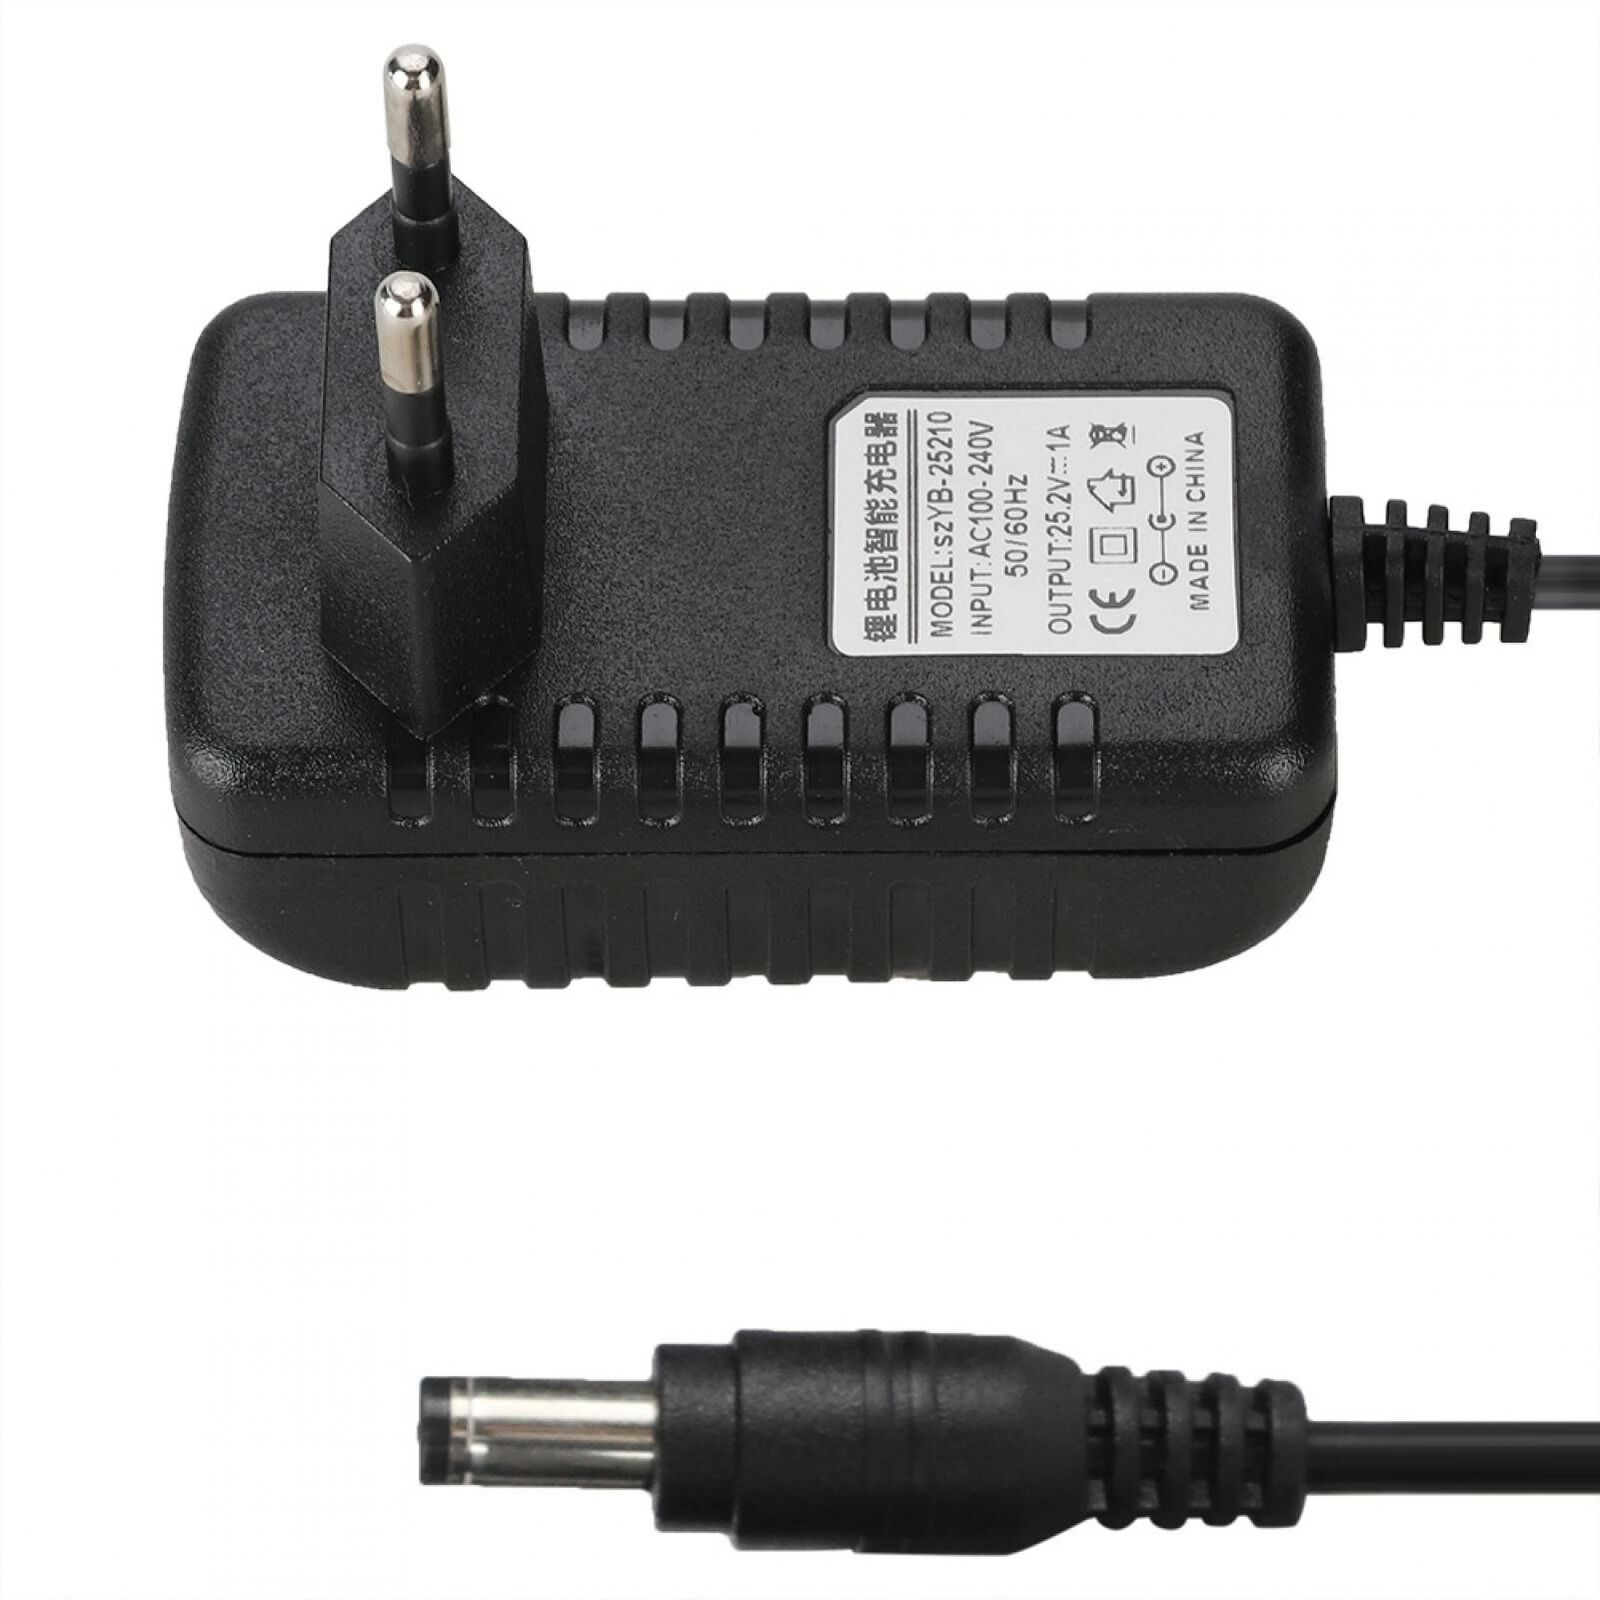 *Brand NEW*25.2V/1A Battery Charger Charger Adapter For Balancing Cars Toys For Charging